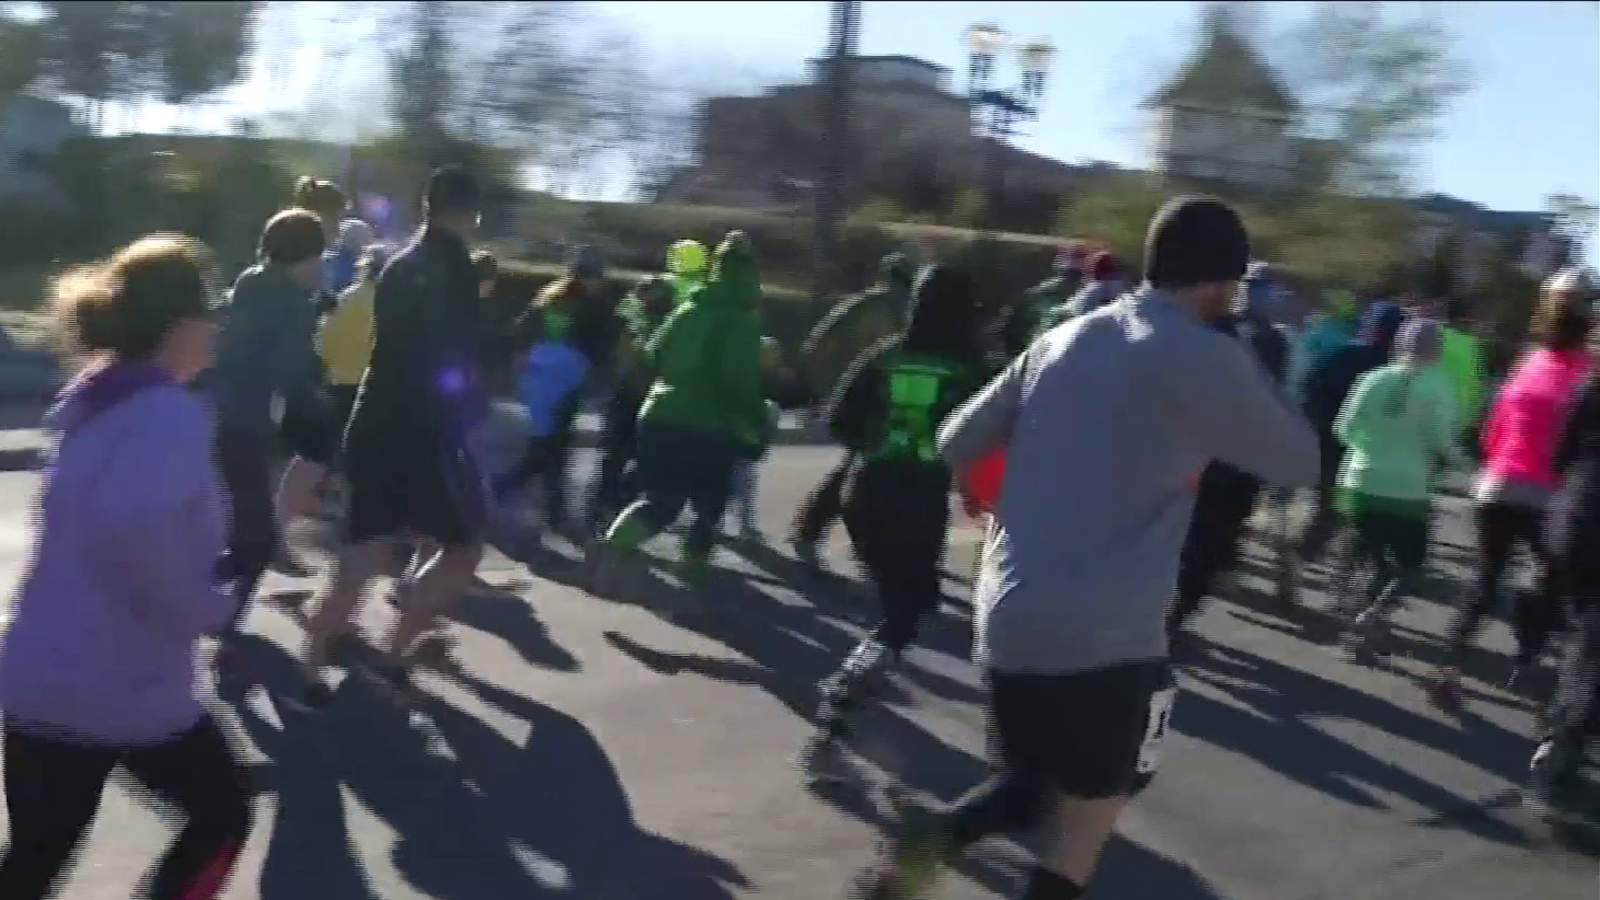 St. Patrick’s Day in August: After postponed twice, Shamrock Hill 5K goes virtual